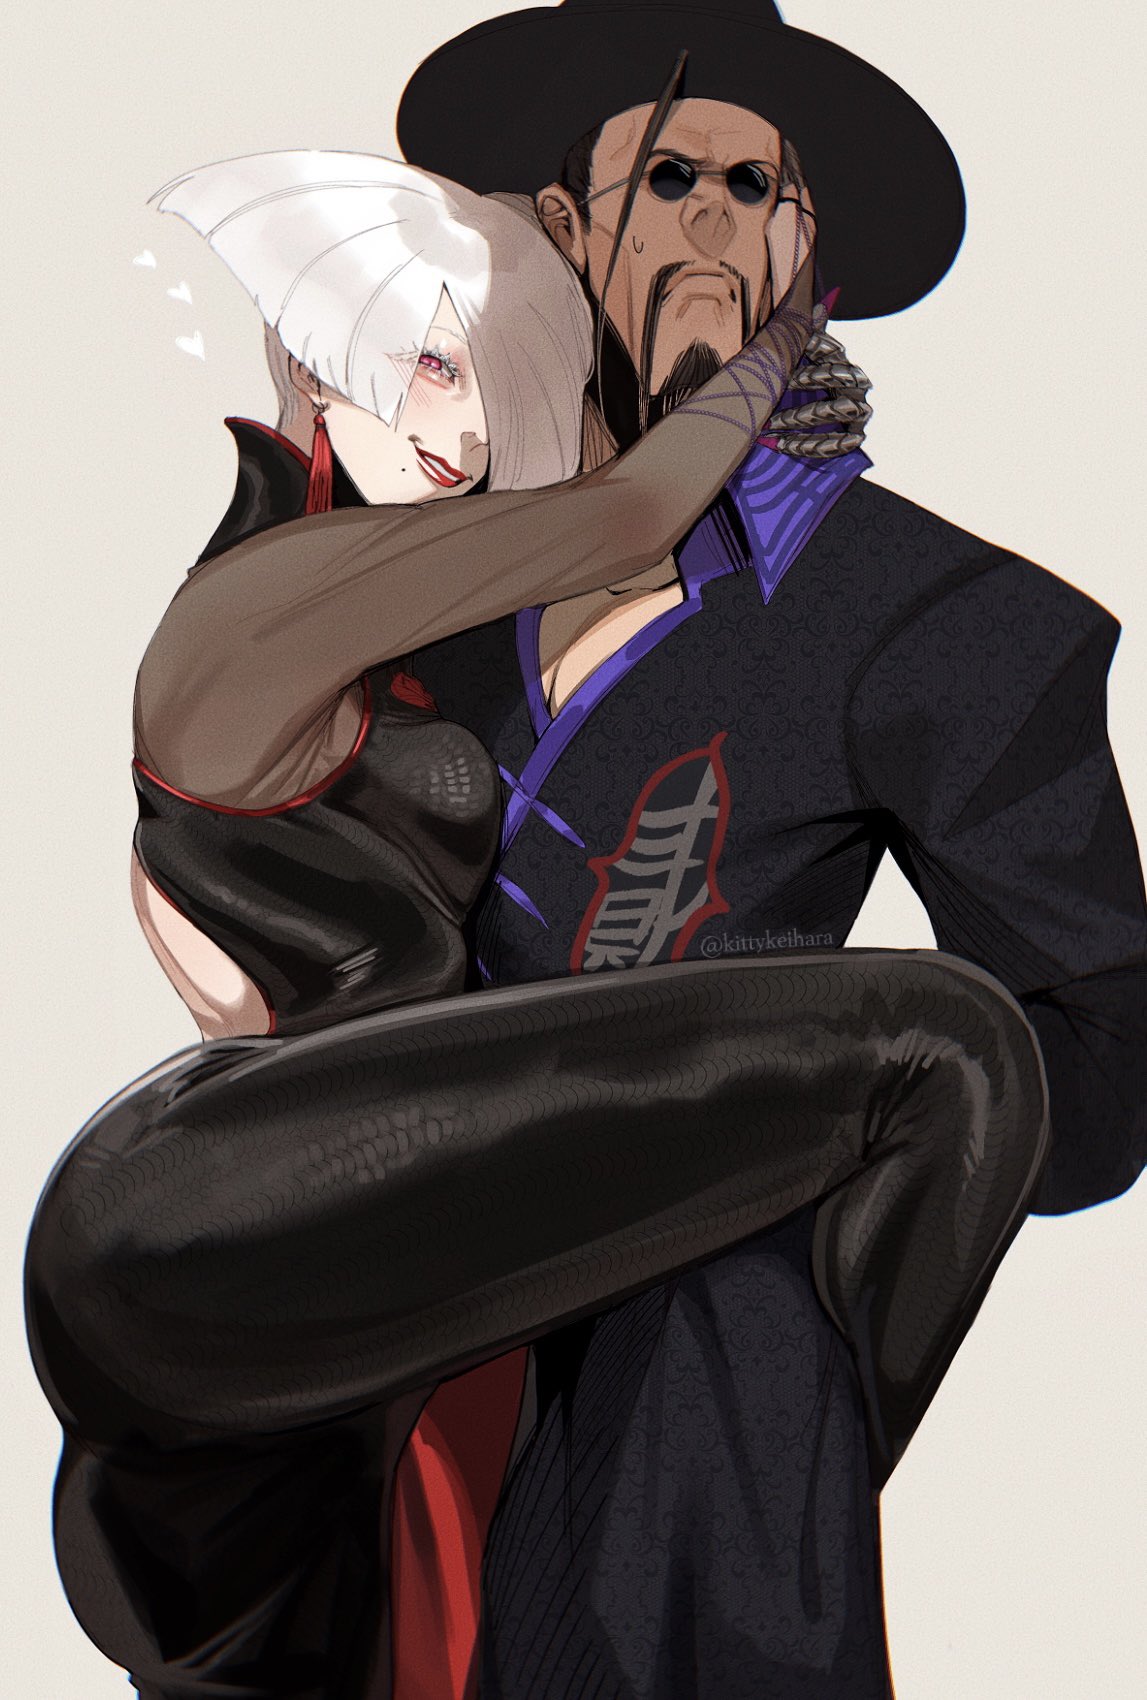 1boy 1girl a.k.i. a.k.i._(street_fighter) albino ass capcom clothed crazy crazy_eyes crazy_girl crazy_smile embrace f.a.n.g hugging kittykeihara legs red_eyes sfw standing street_fighter street_fighter_6 tight_clothing white_hair